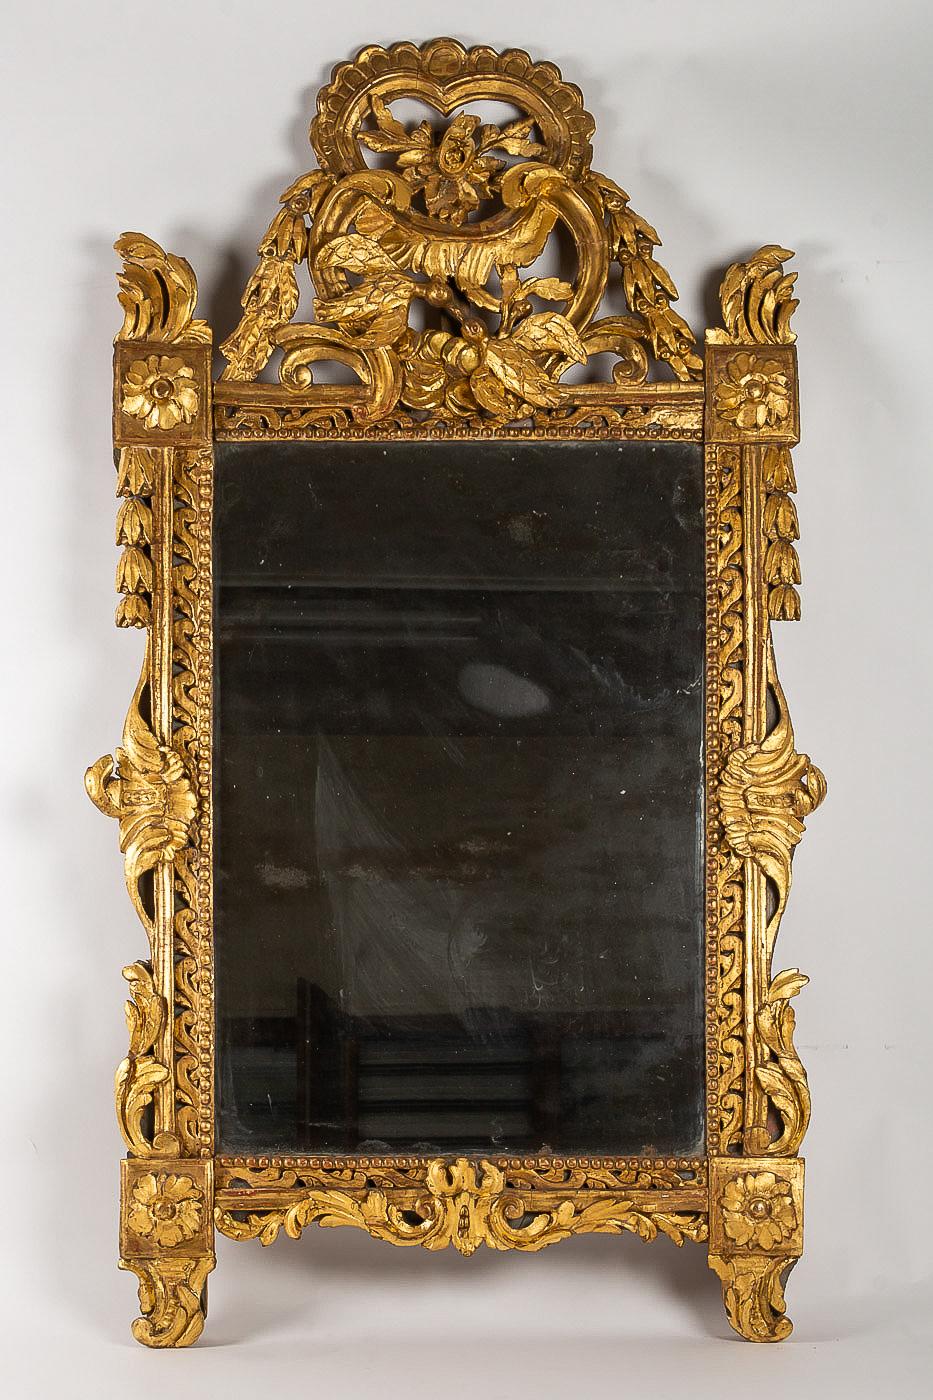 French Louis XVI period carved and giltwood front top mirror, circa 1780.

A gorgeous and decorative French carved gilt-wood front top mirror.
Our mirror designed with interlacing frieze decoration, topped with a front-top with two intertwined